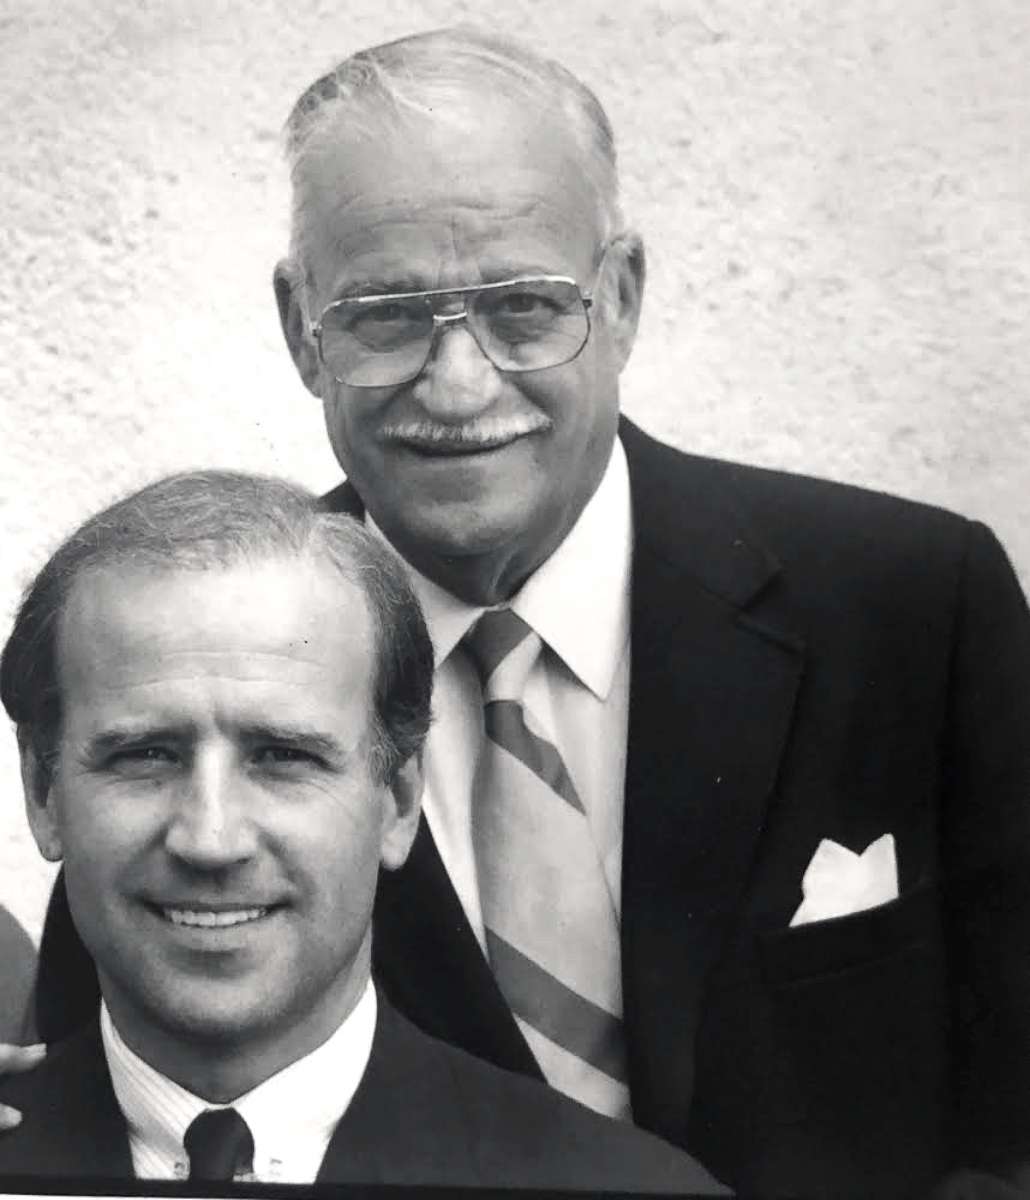 PHOTO: Former Vice President Joe Biden with his dad, Joseph, in an undated photo.
	
